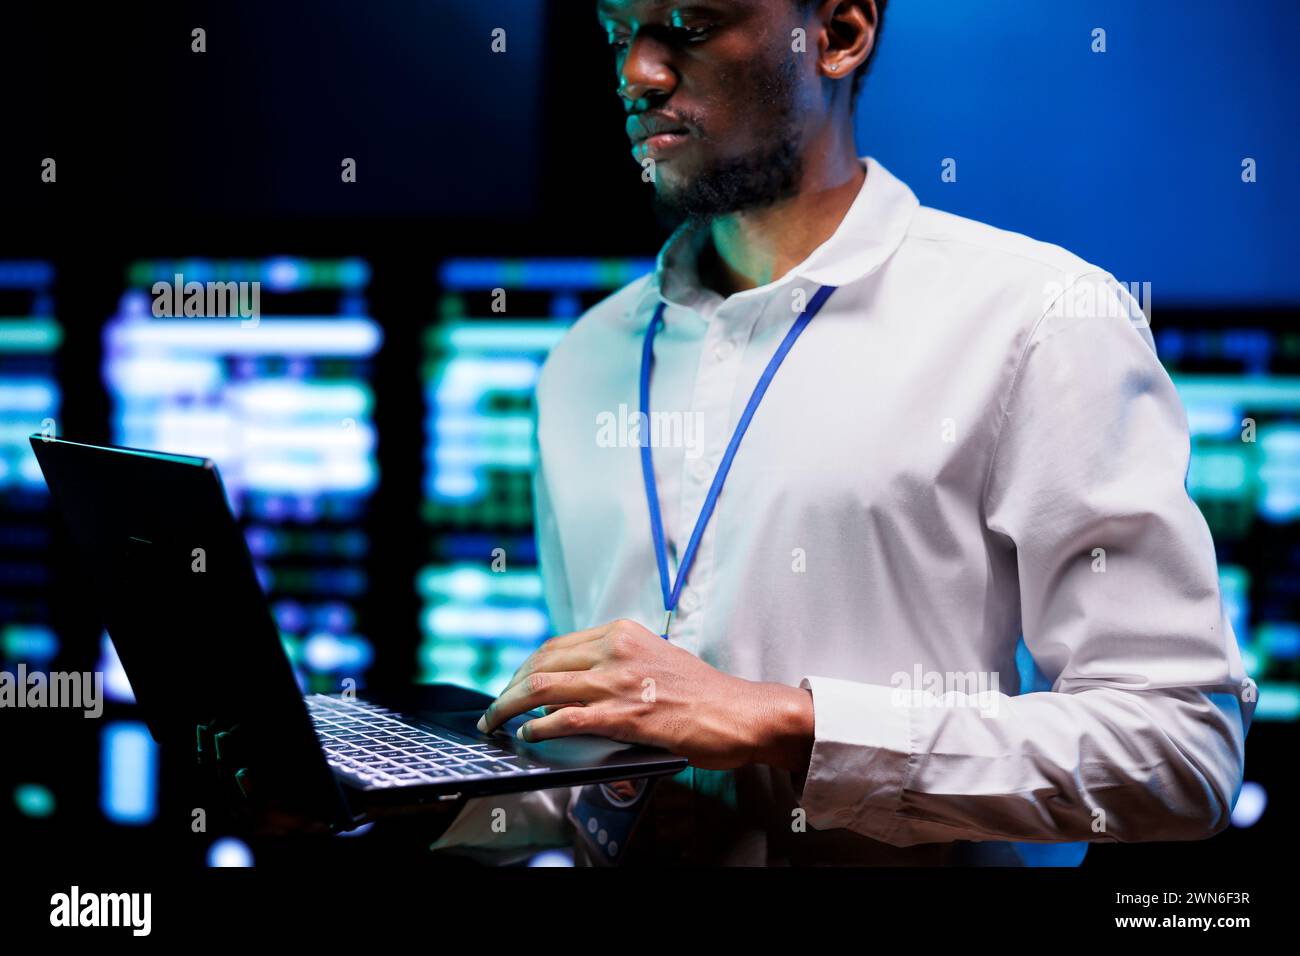 African american IT developer using laptop to examine server mainframes providing vast computing resources. Data center enabling AI to process massive datasets for complex machine learning operations Stock Photo